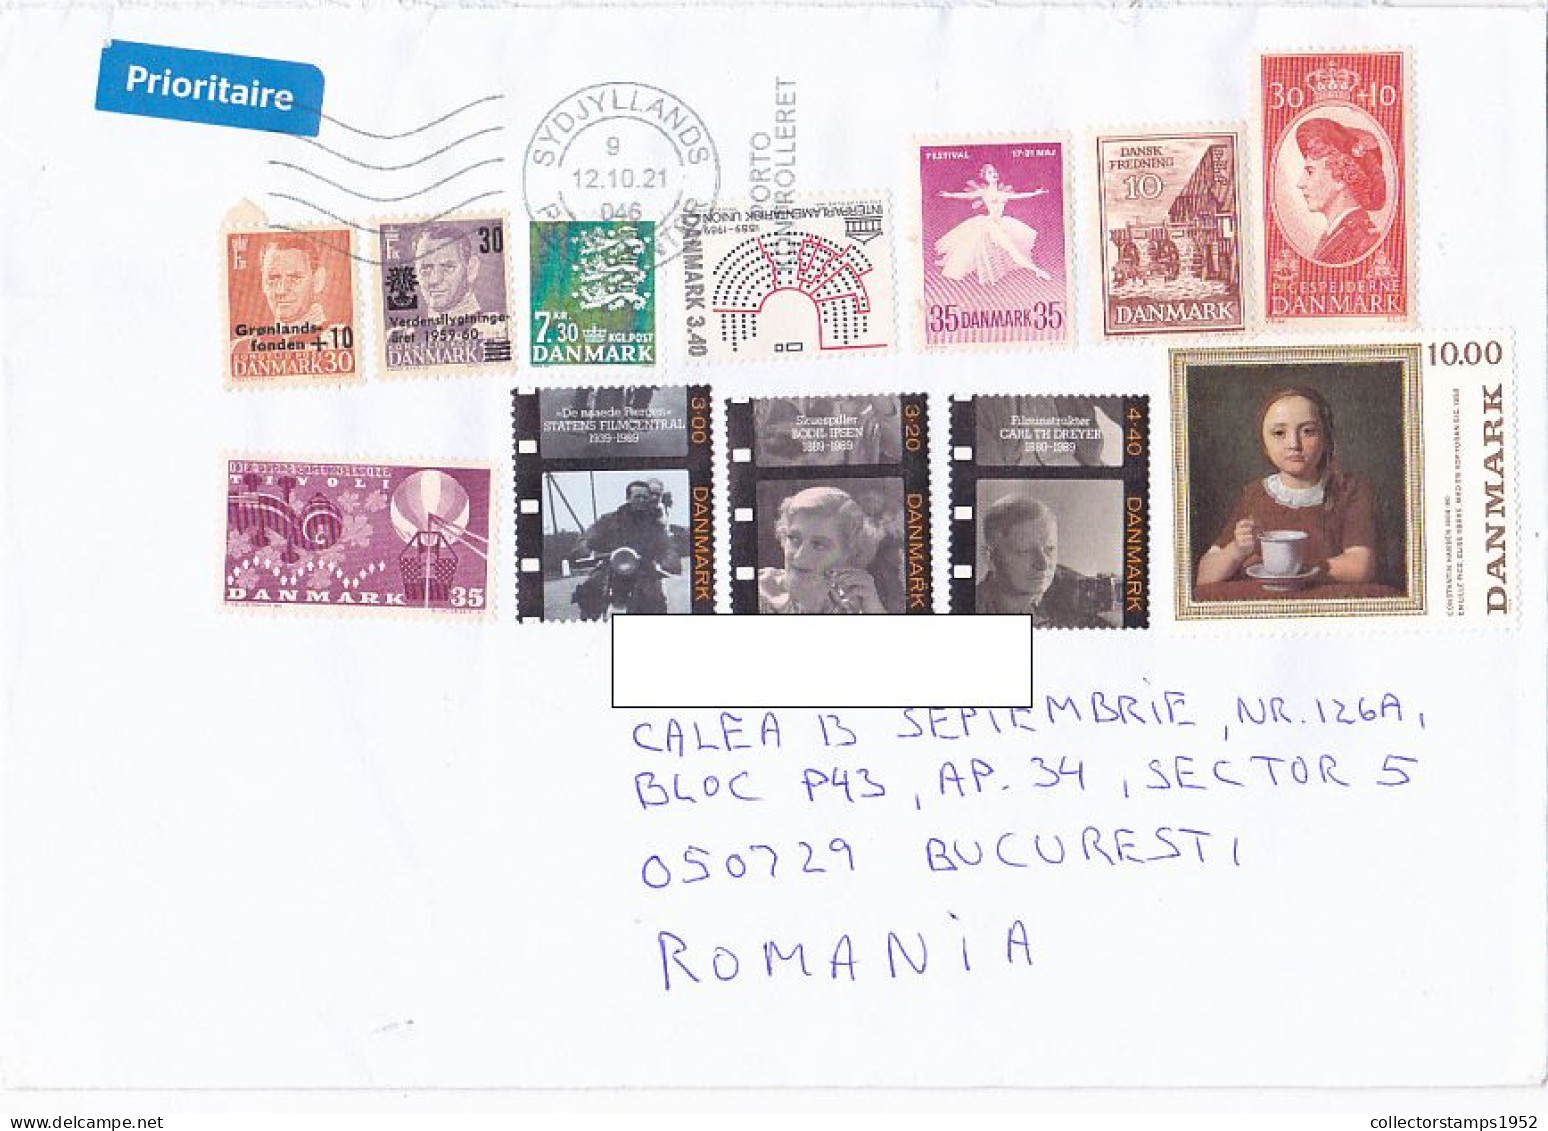 KING FREDERICK IX, ACTORS, PERSONALITIES, PAINTING, PARLIAMENT, FINE STAMPS ON COVER, 2021, DENMARK - Briefe U. Dokumente